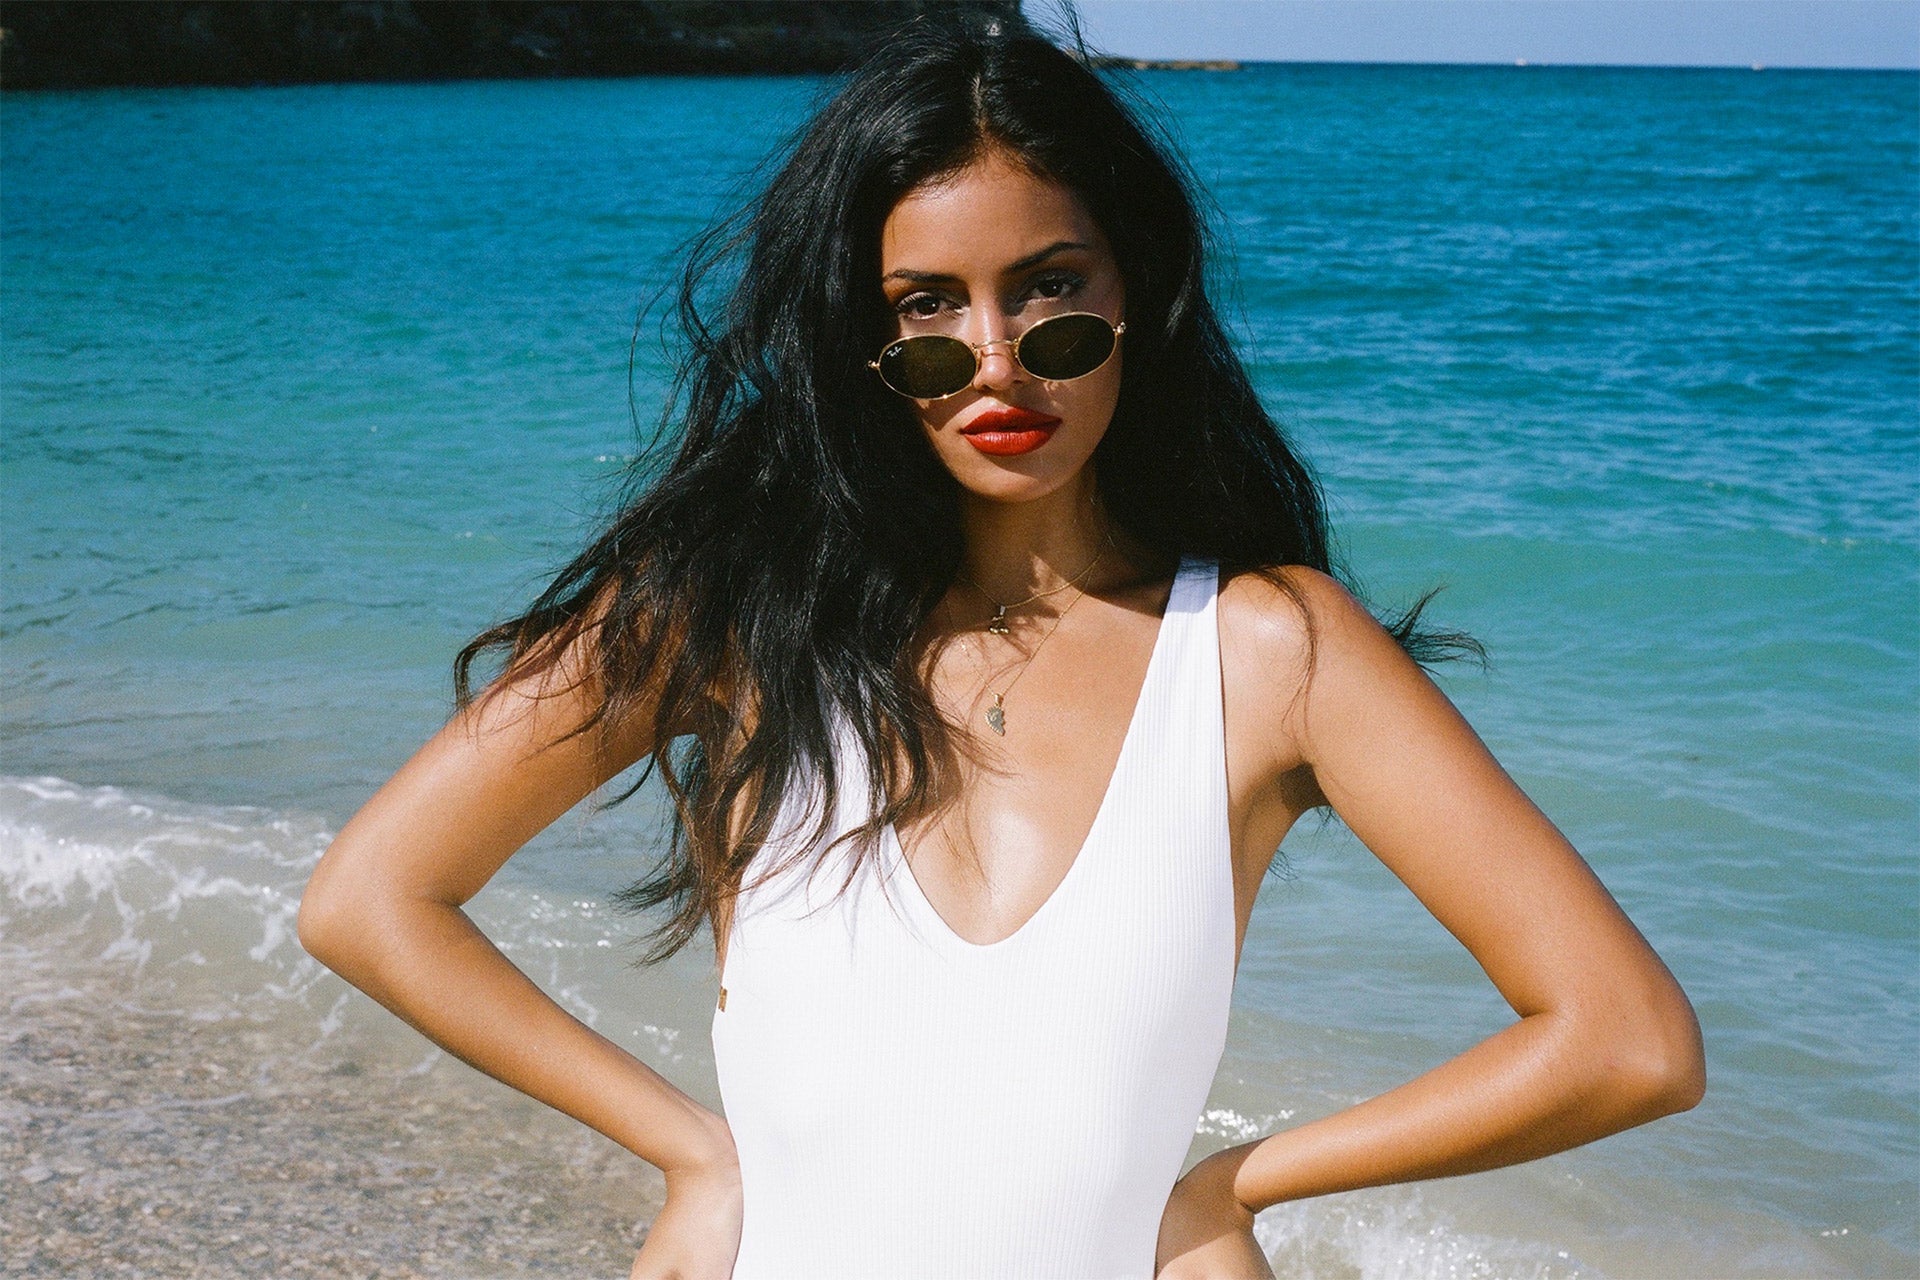 Cindy Kimberly wearing the Resort One Piece in Whipped Cream at the beach